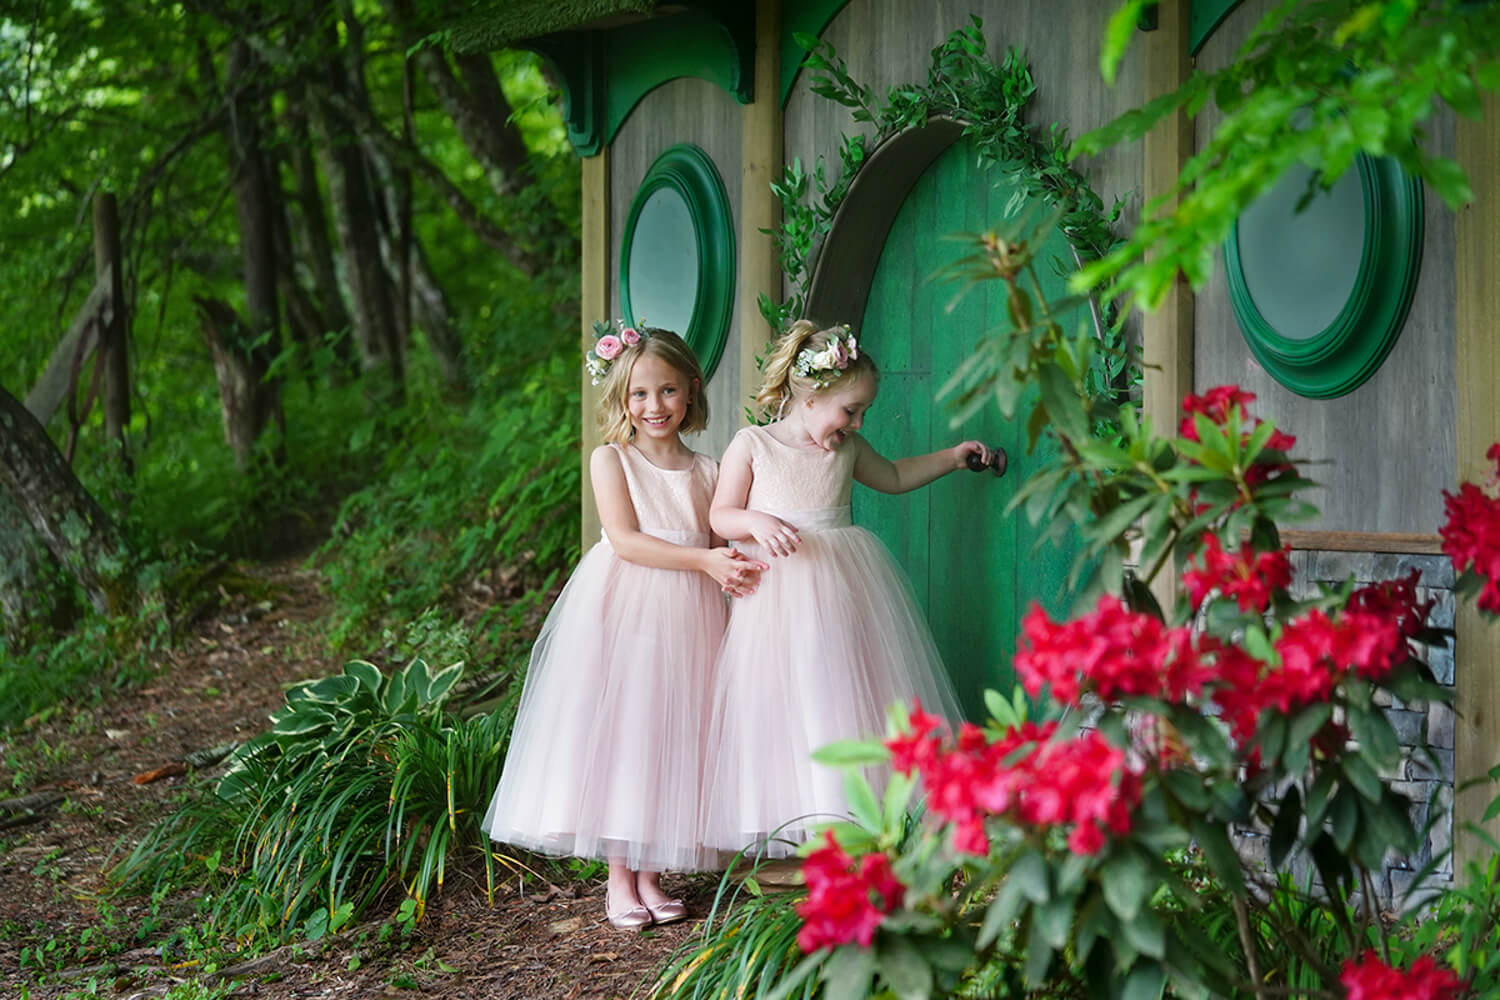 Two flower girls in pink dressing at the round green door of a fairy hobbit house with bright pink flowers in bloom